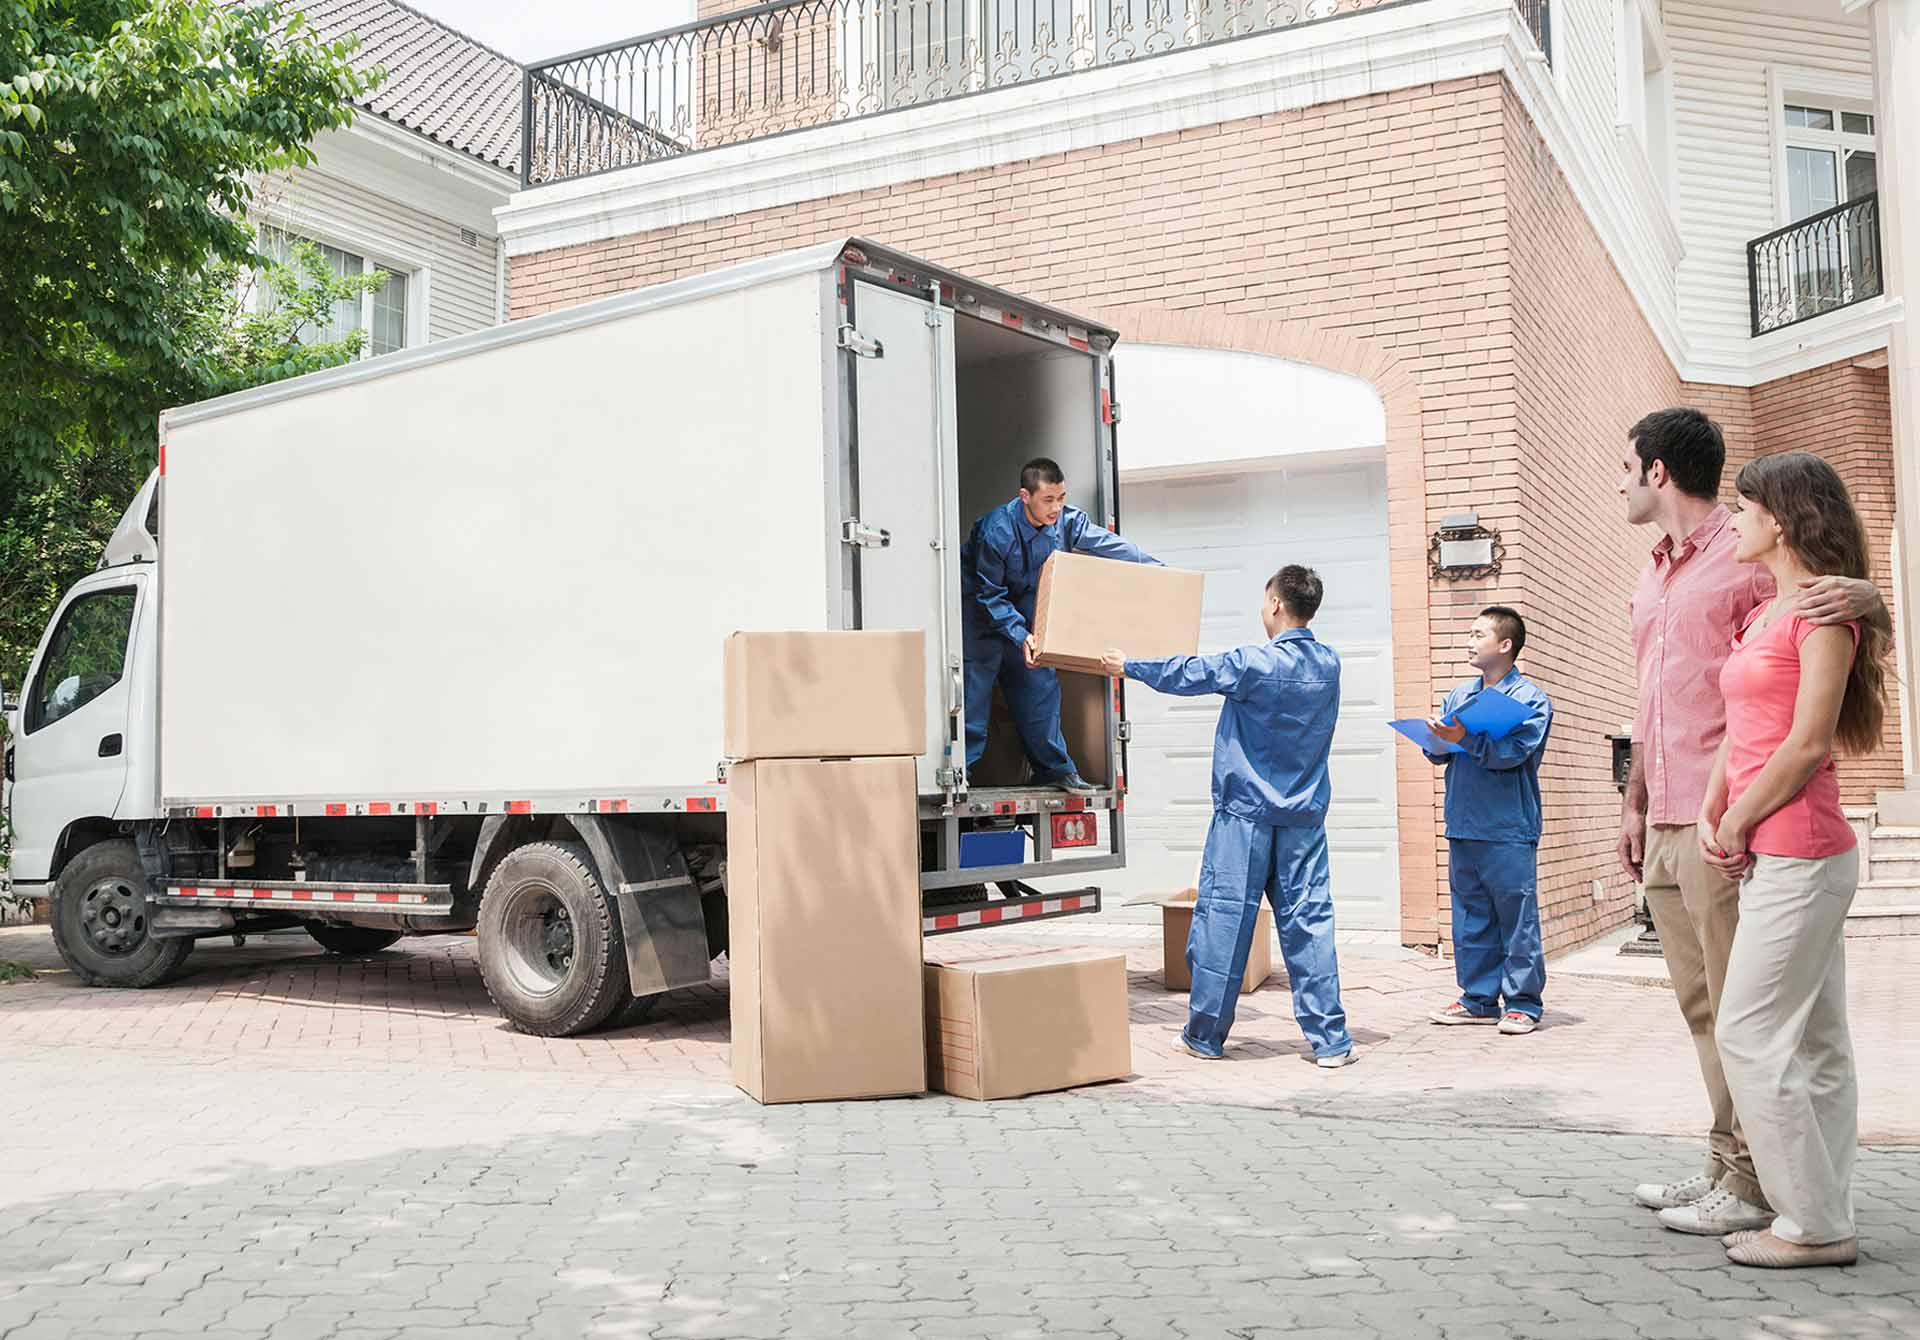 Best Removals Company